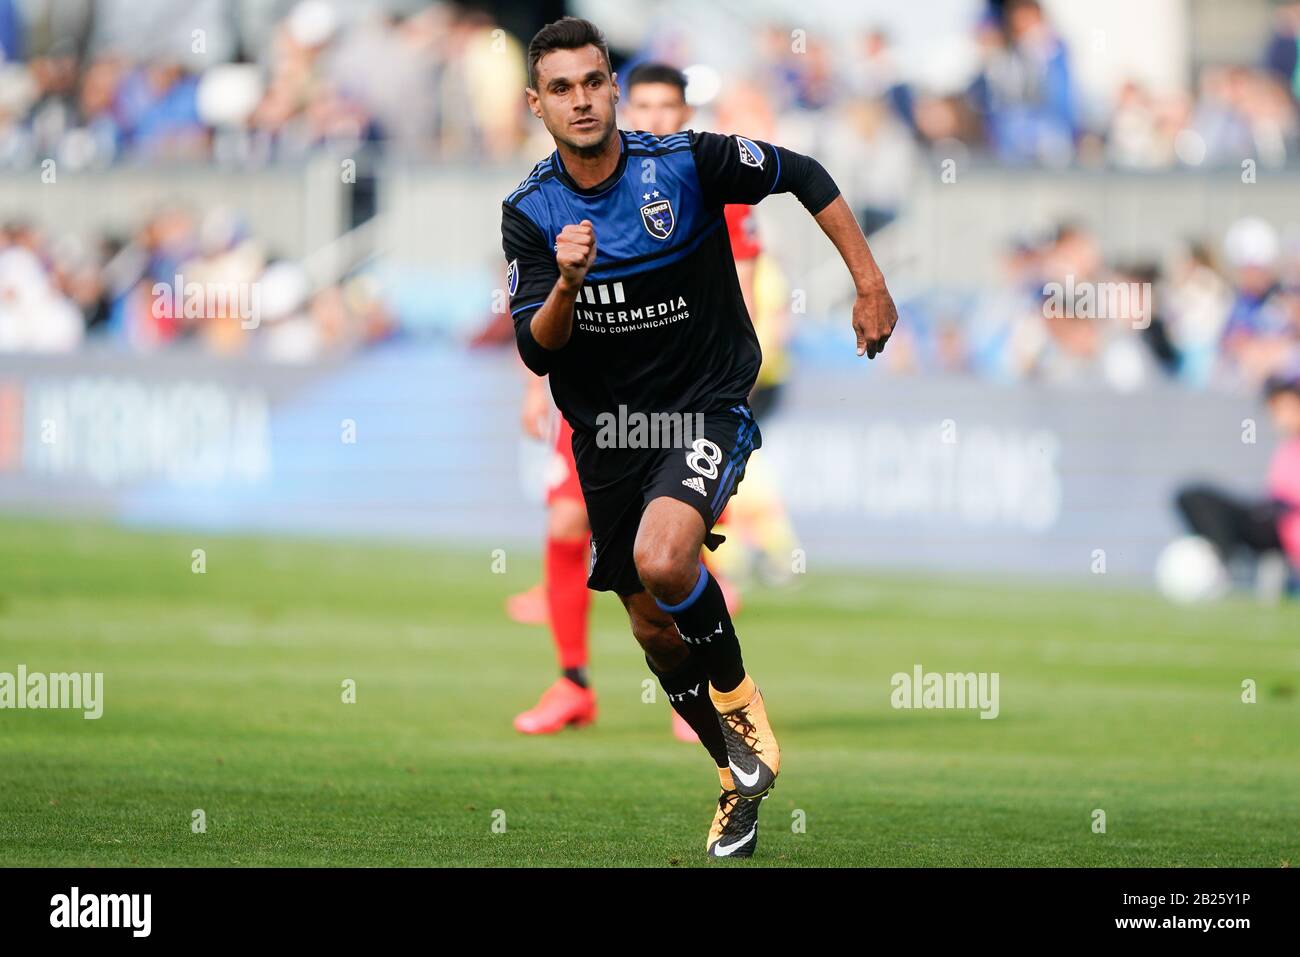 San Jose Earthquakes forward Chris Wondolowski (8) during the second half of the MLS soccer game against the Toronto FC, Saturday, Feb. 28, 2020, in San Jose, Calif. The San Jose Earthquakes and the Toronto FC tied the game 2-2. (Photo by IOS/ESPA-Images) Stock Photo